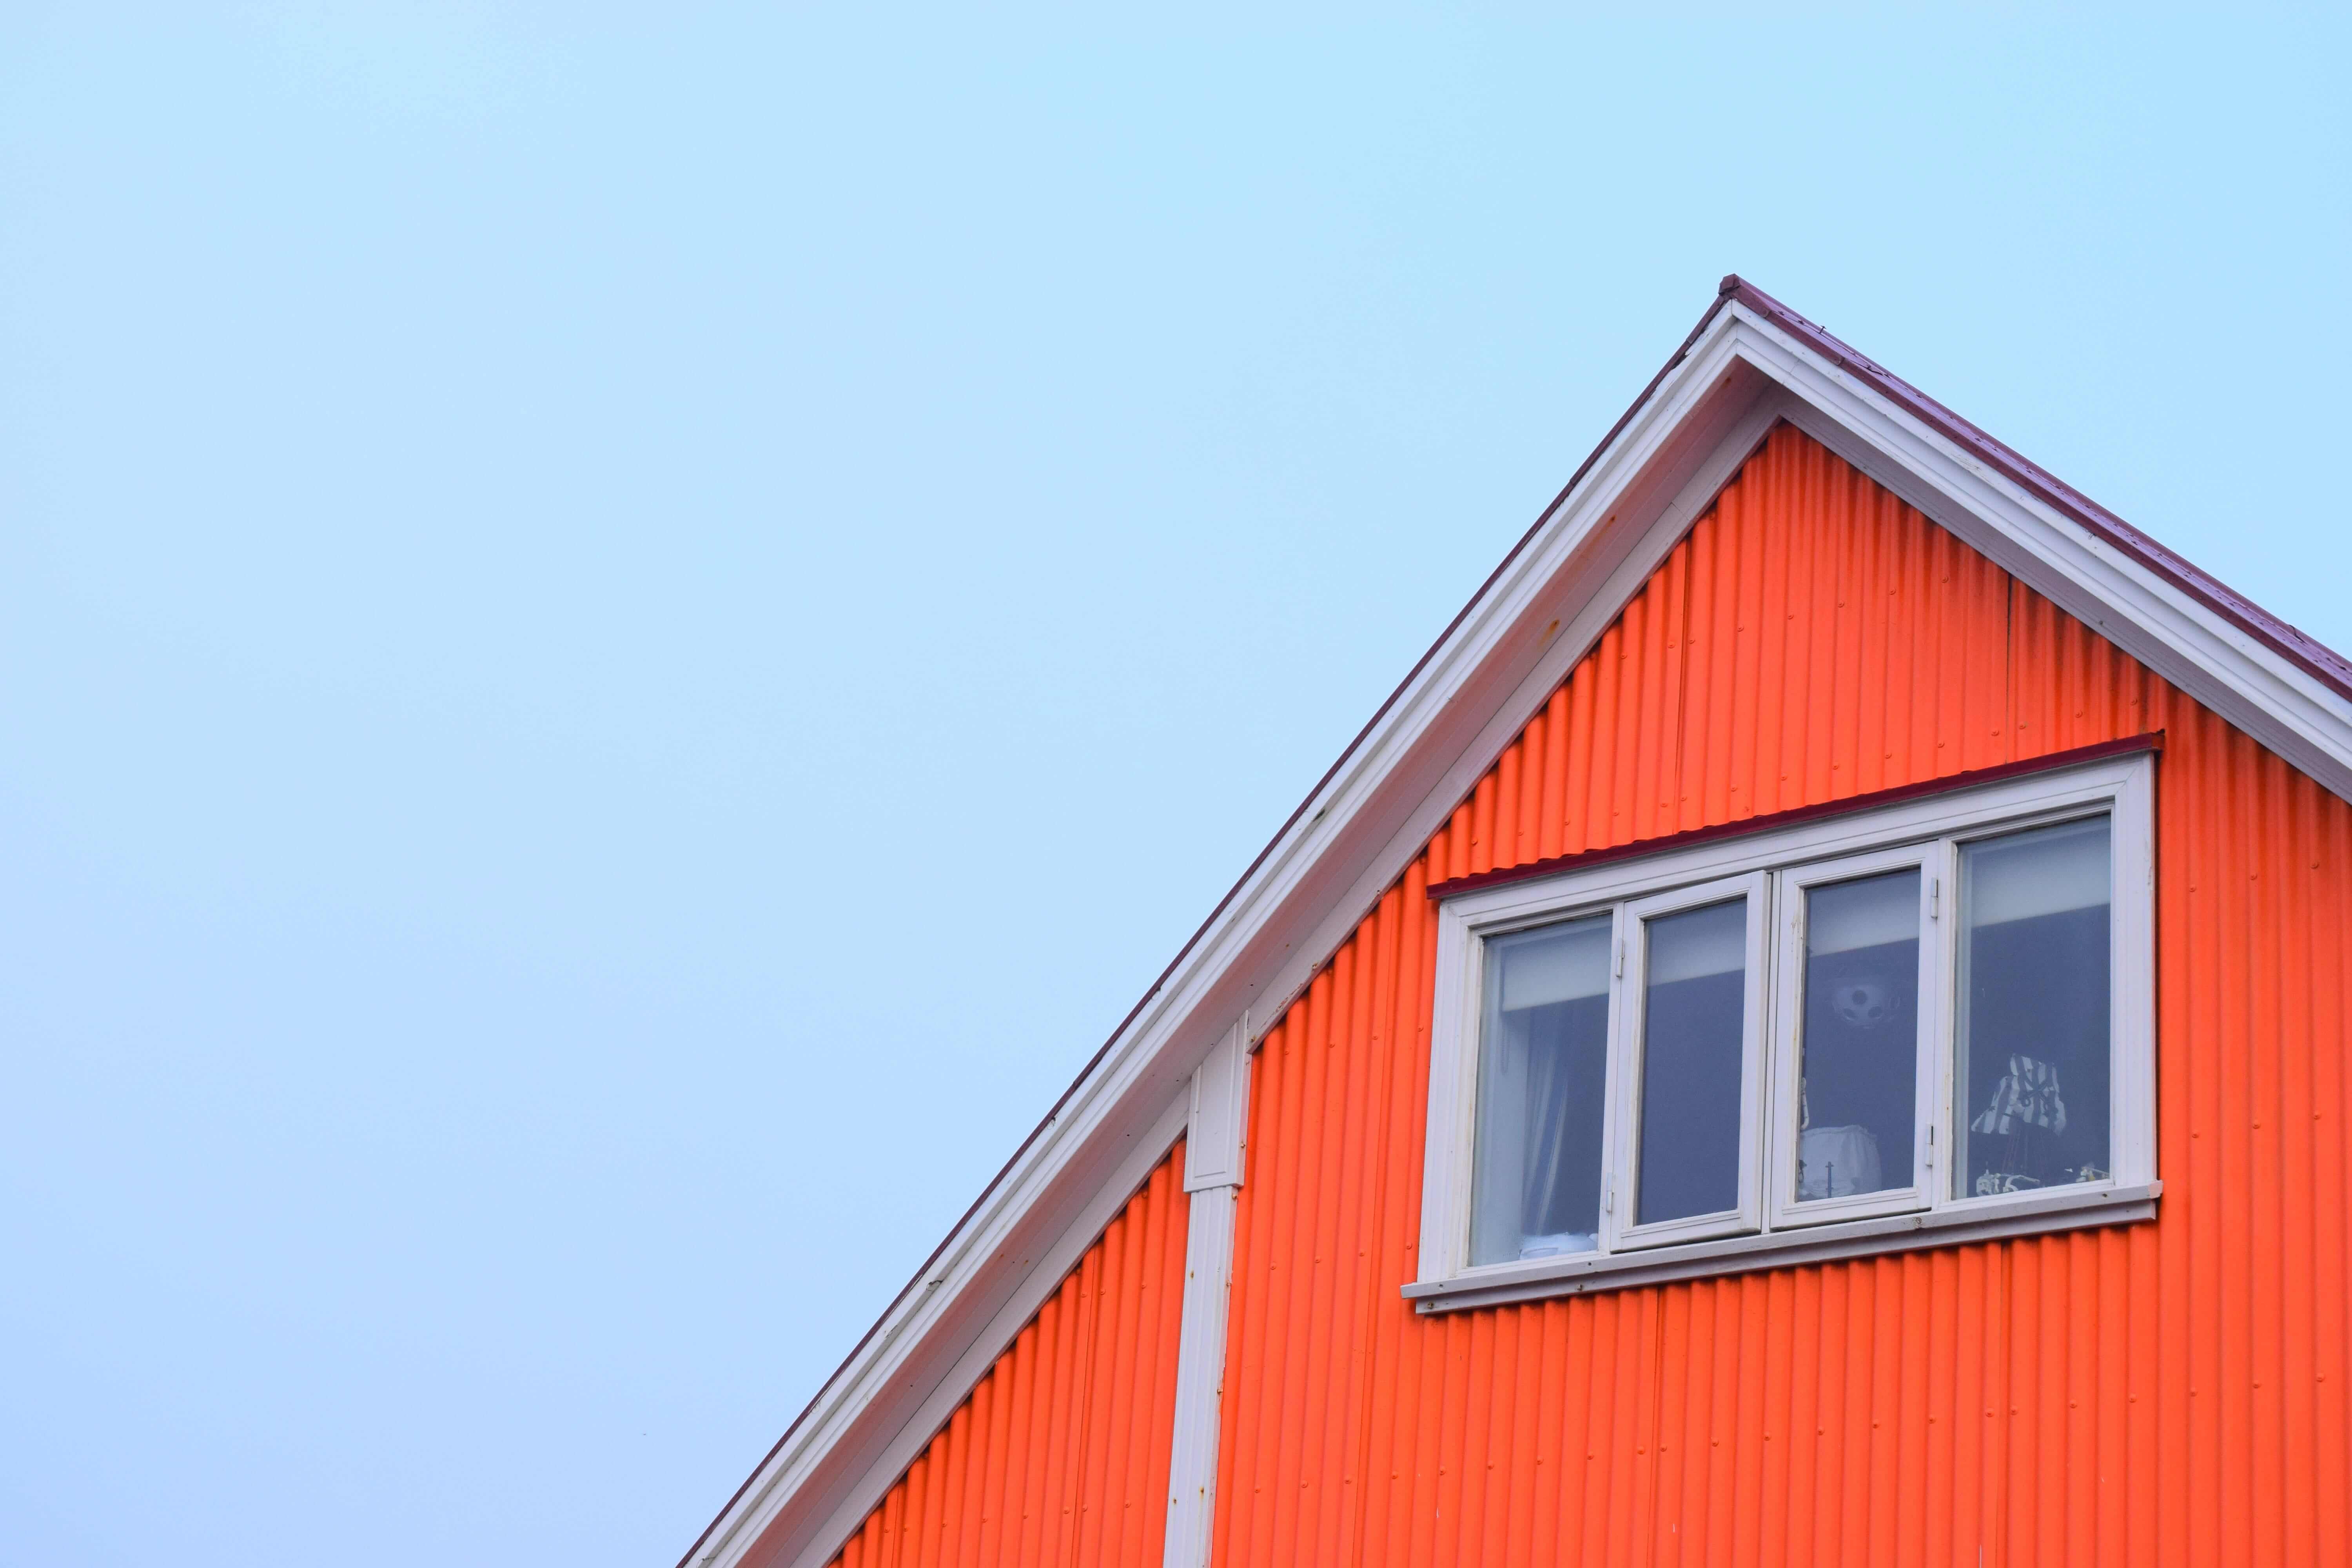 The top portion of an A-frame house painted bright orange.  